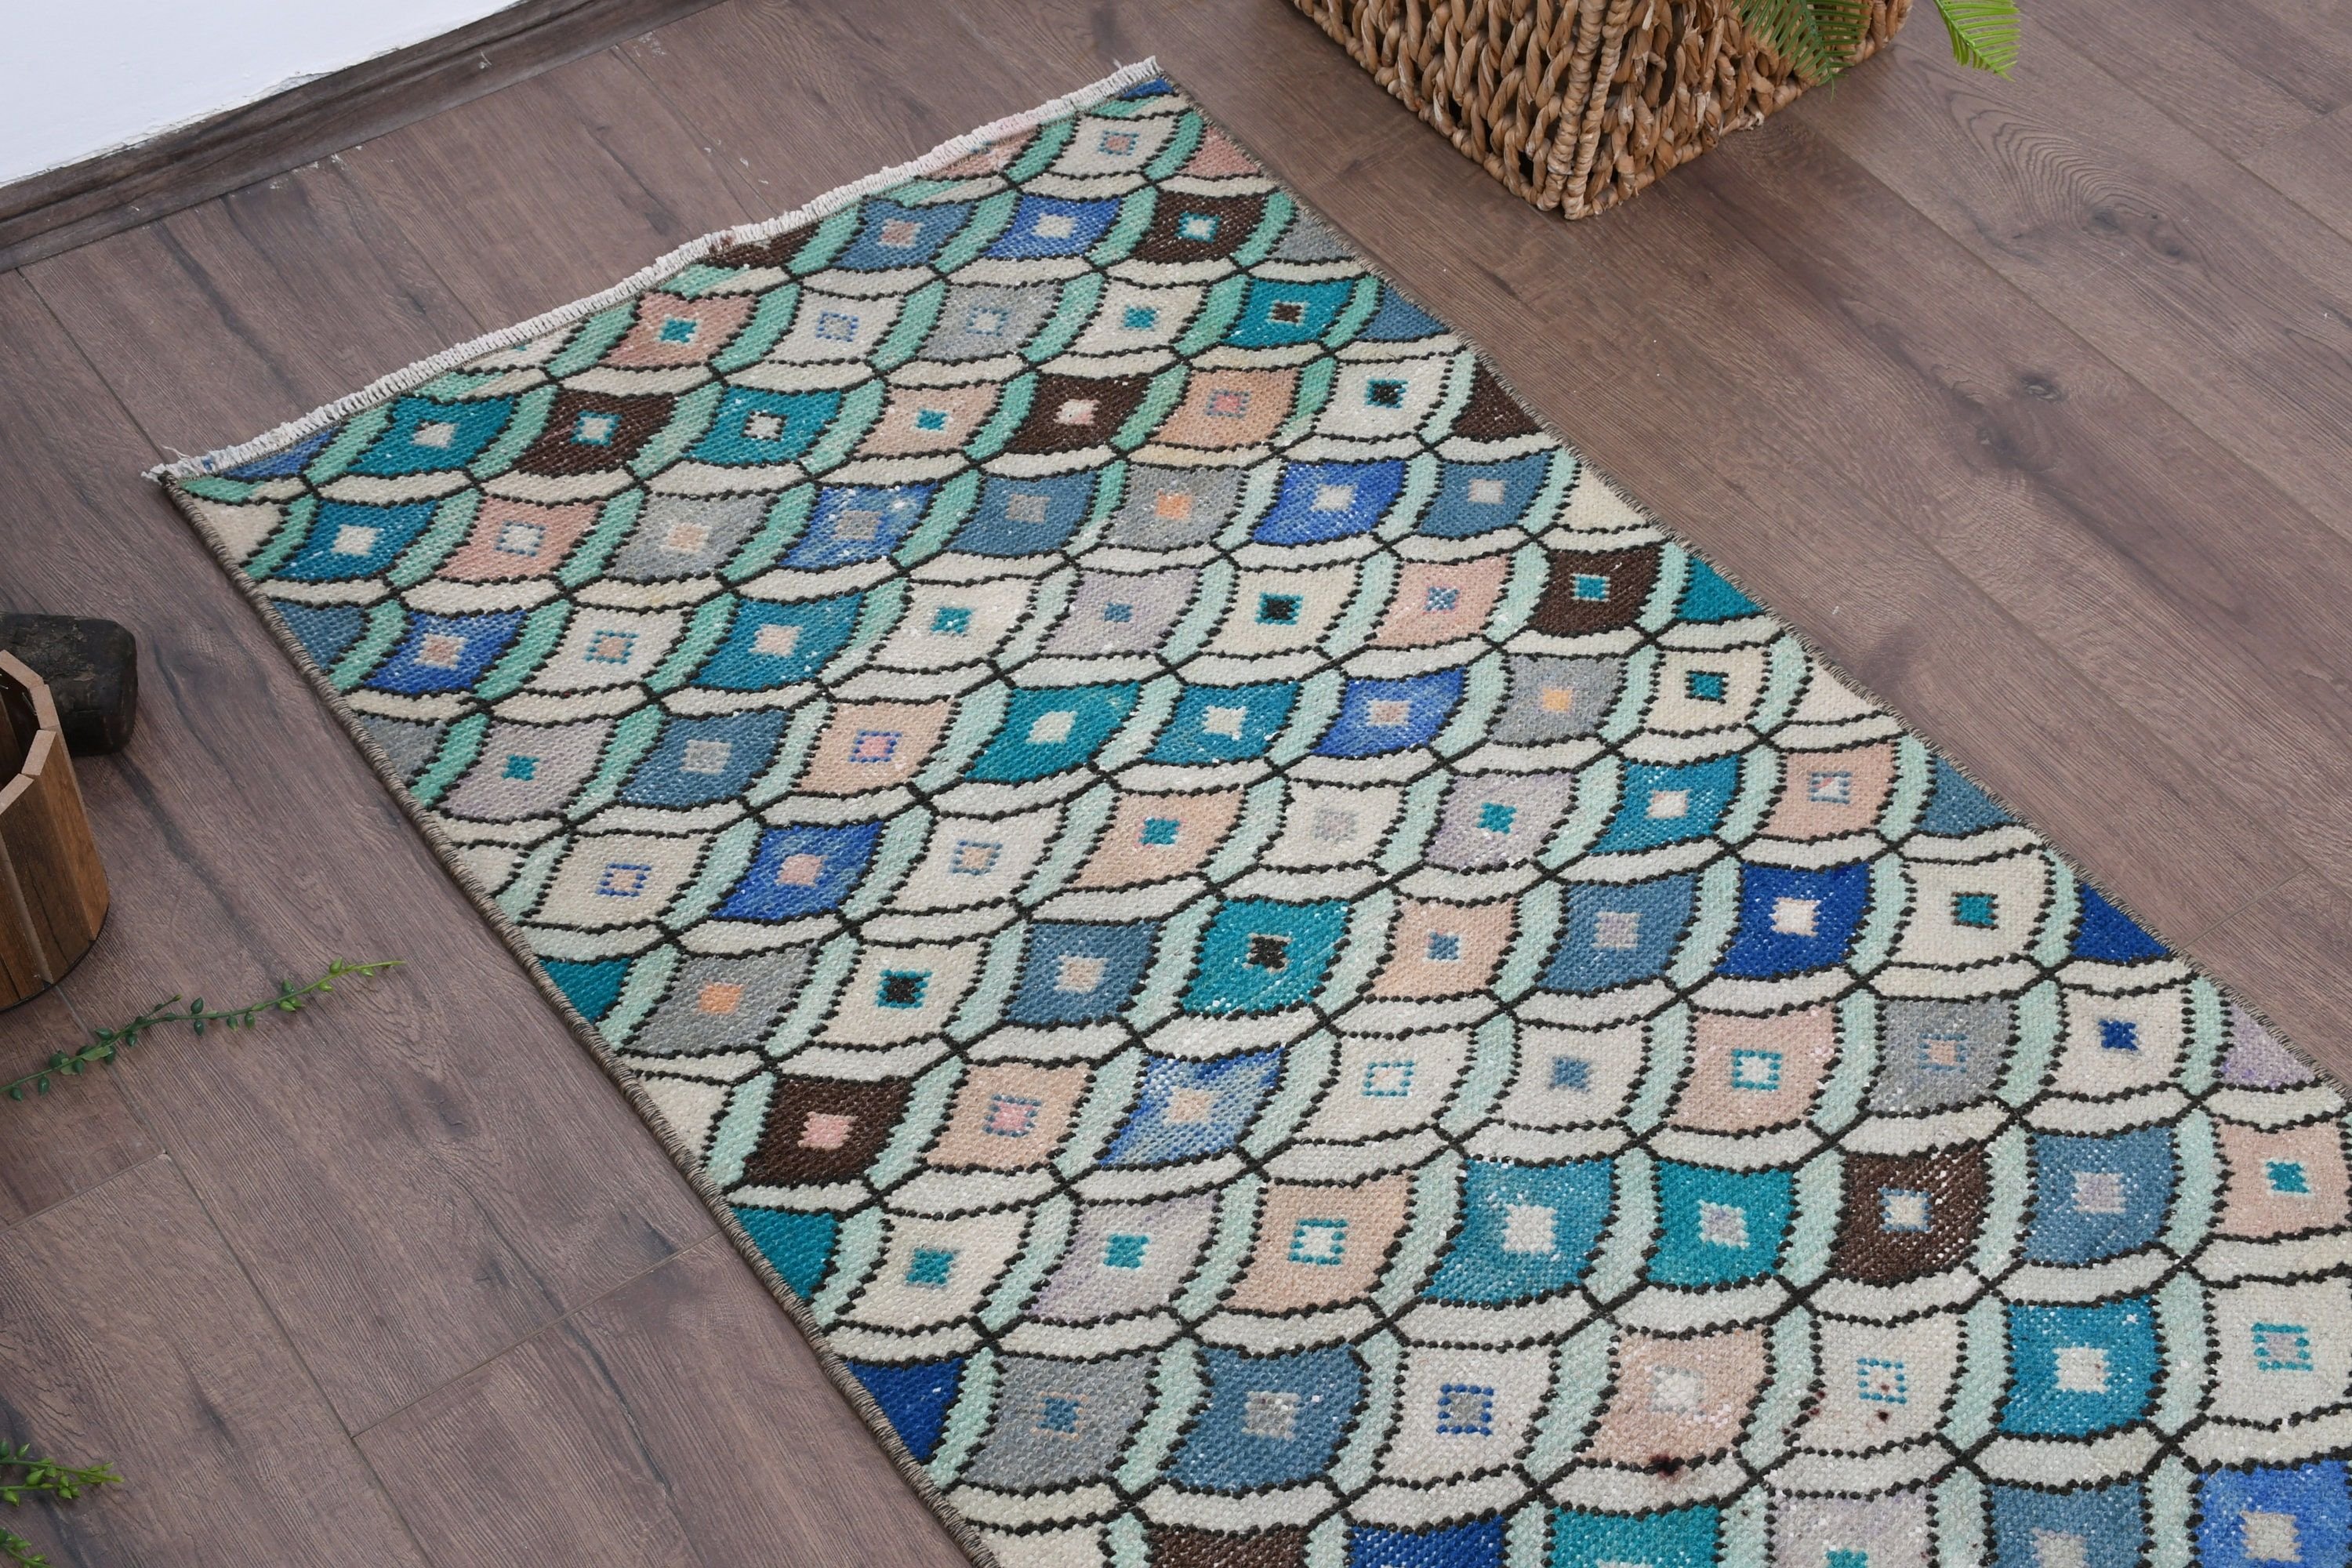 Bedroom Rug, Oushak Rug, 2.2x3.9 ft Small Rug, Vintage Rugs, Anatolian Rugs, Turkish Rugs, Kitchen Rug, Rugs for Car Mat, Blue Cool Rug